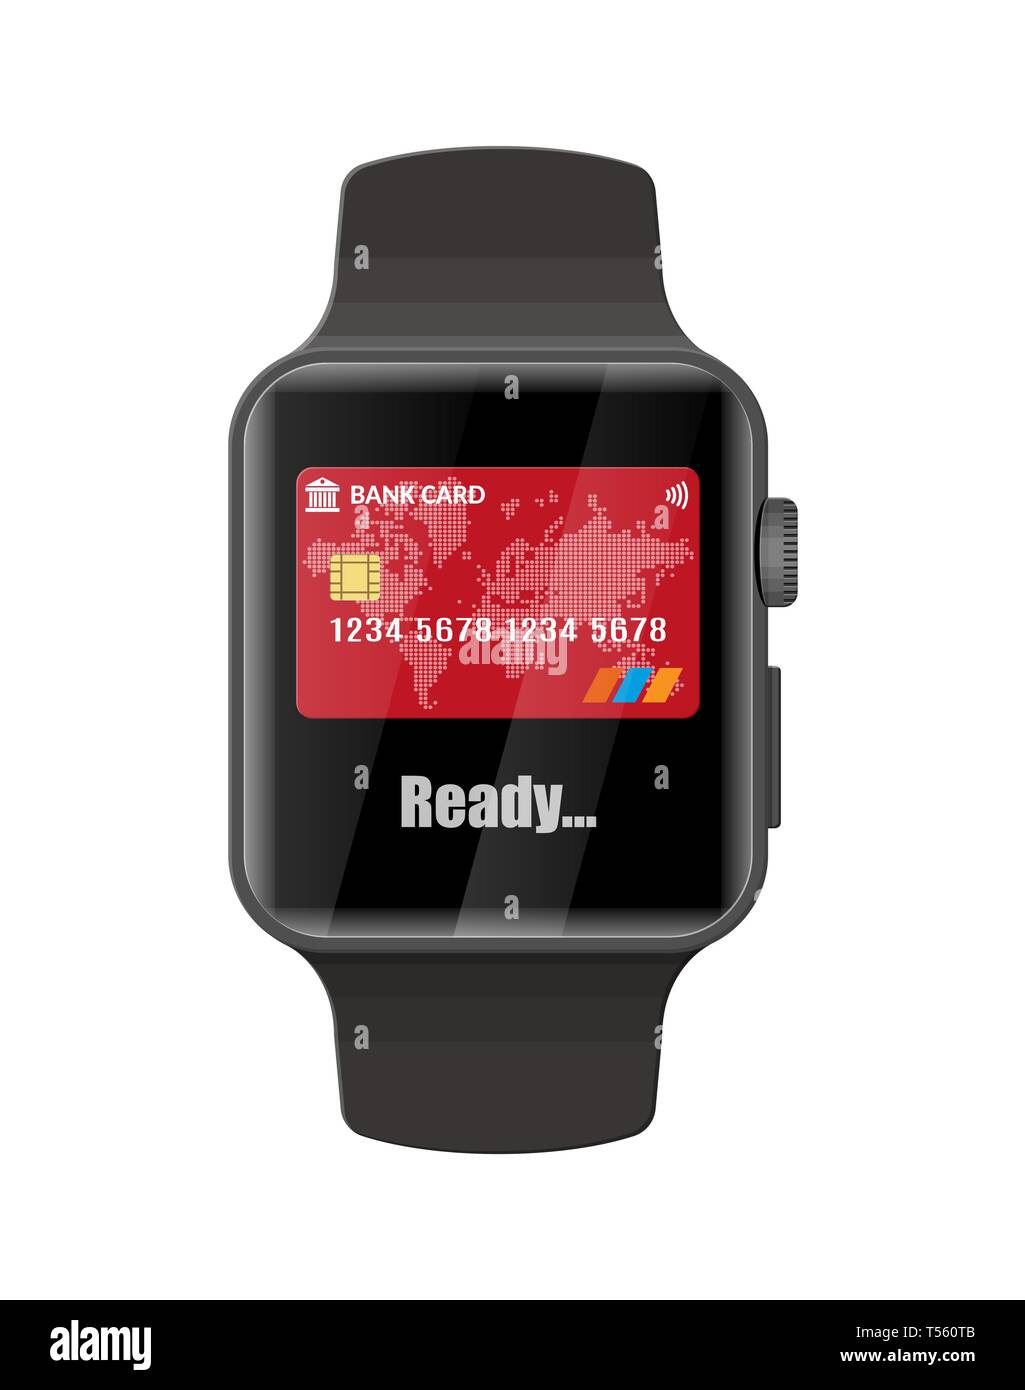 Smart watch contactless payments. Smartwatch modern device